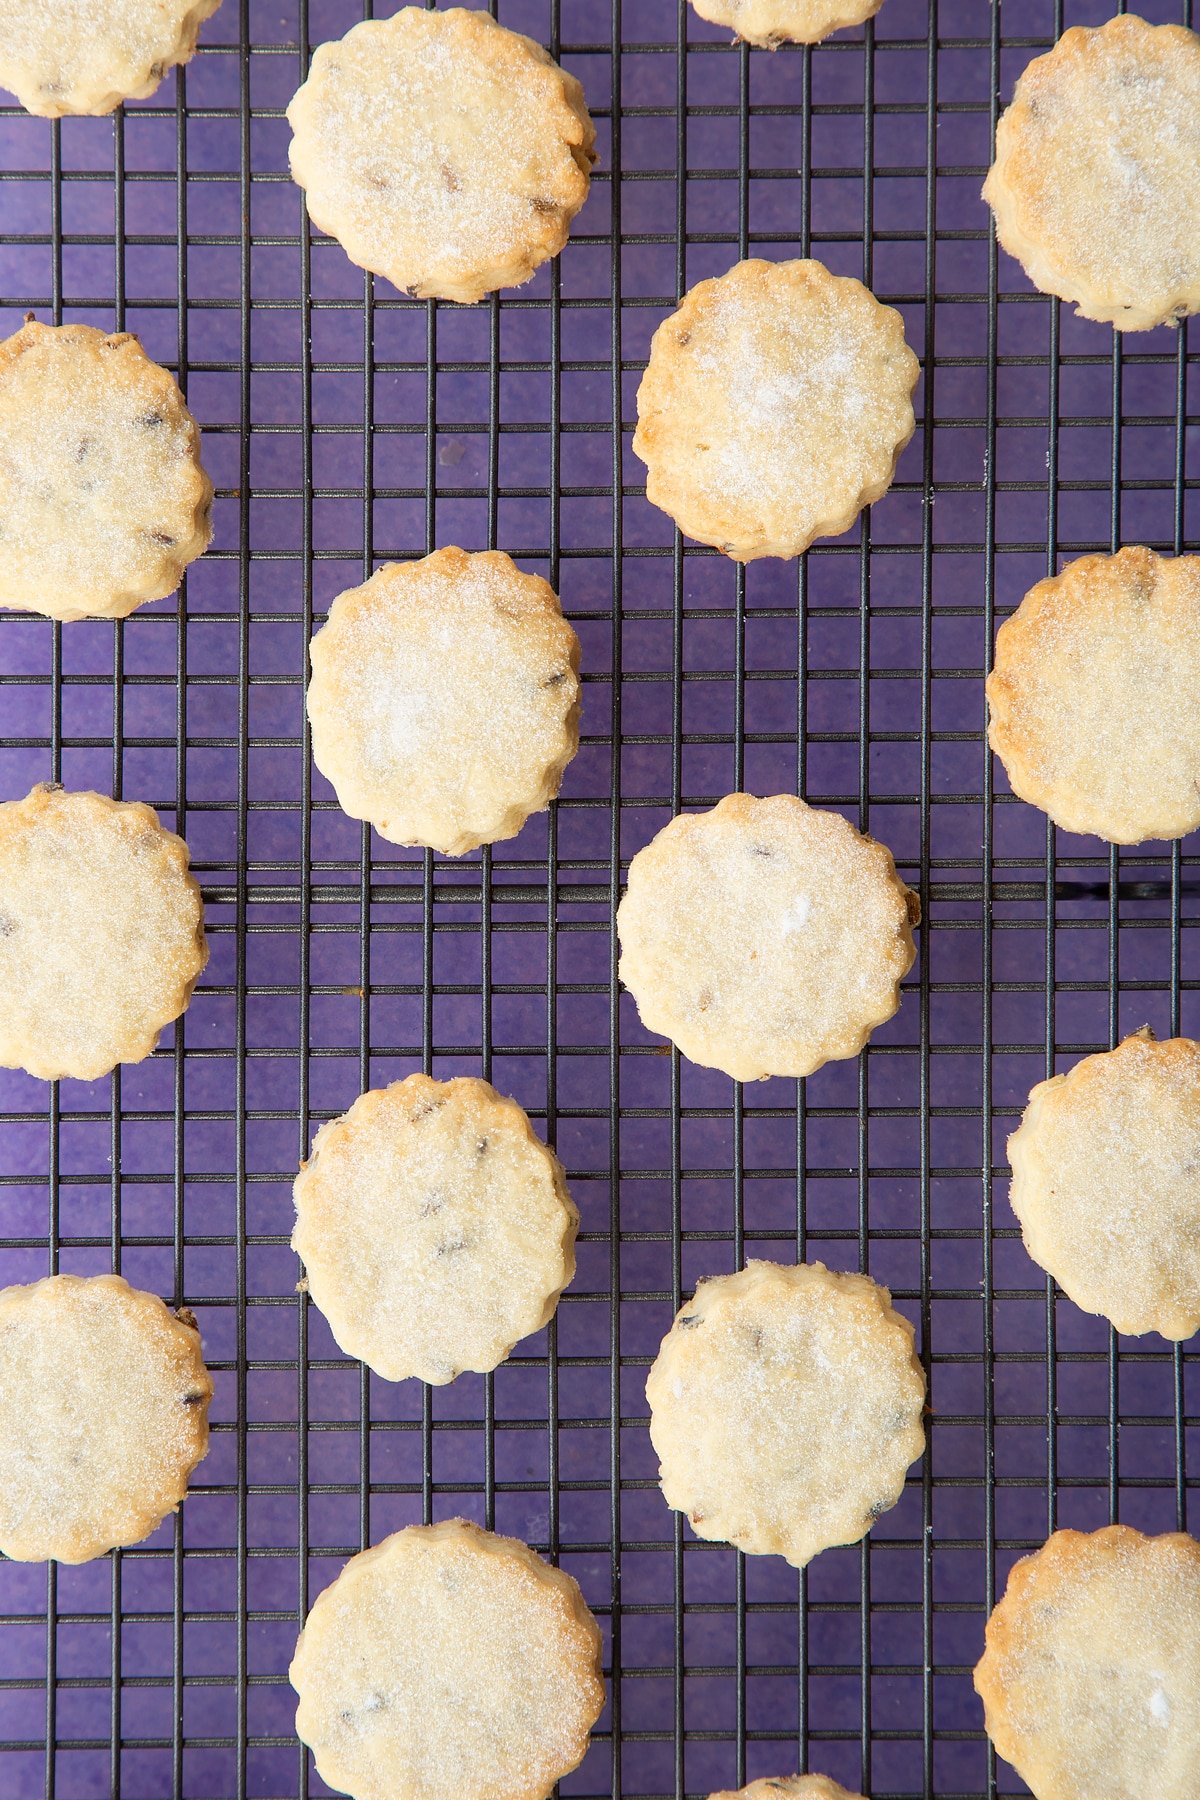 Lavender shortbread cookies freshly baked on a cooling rock.